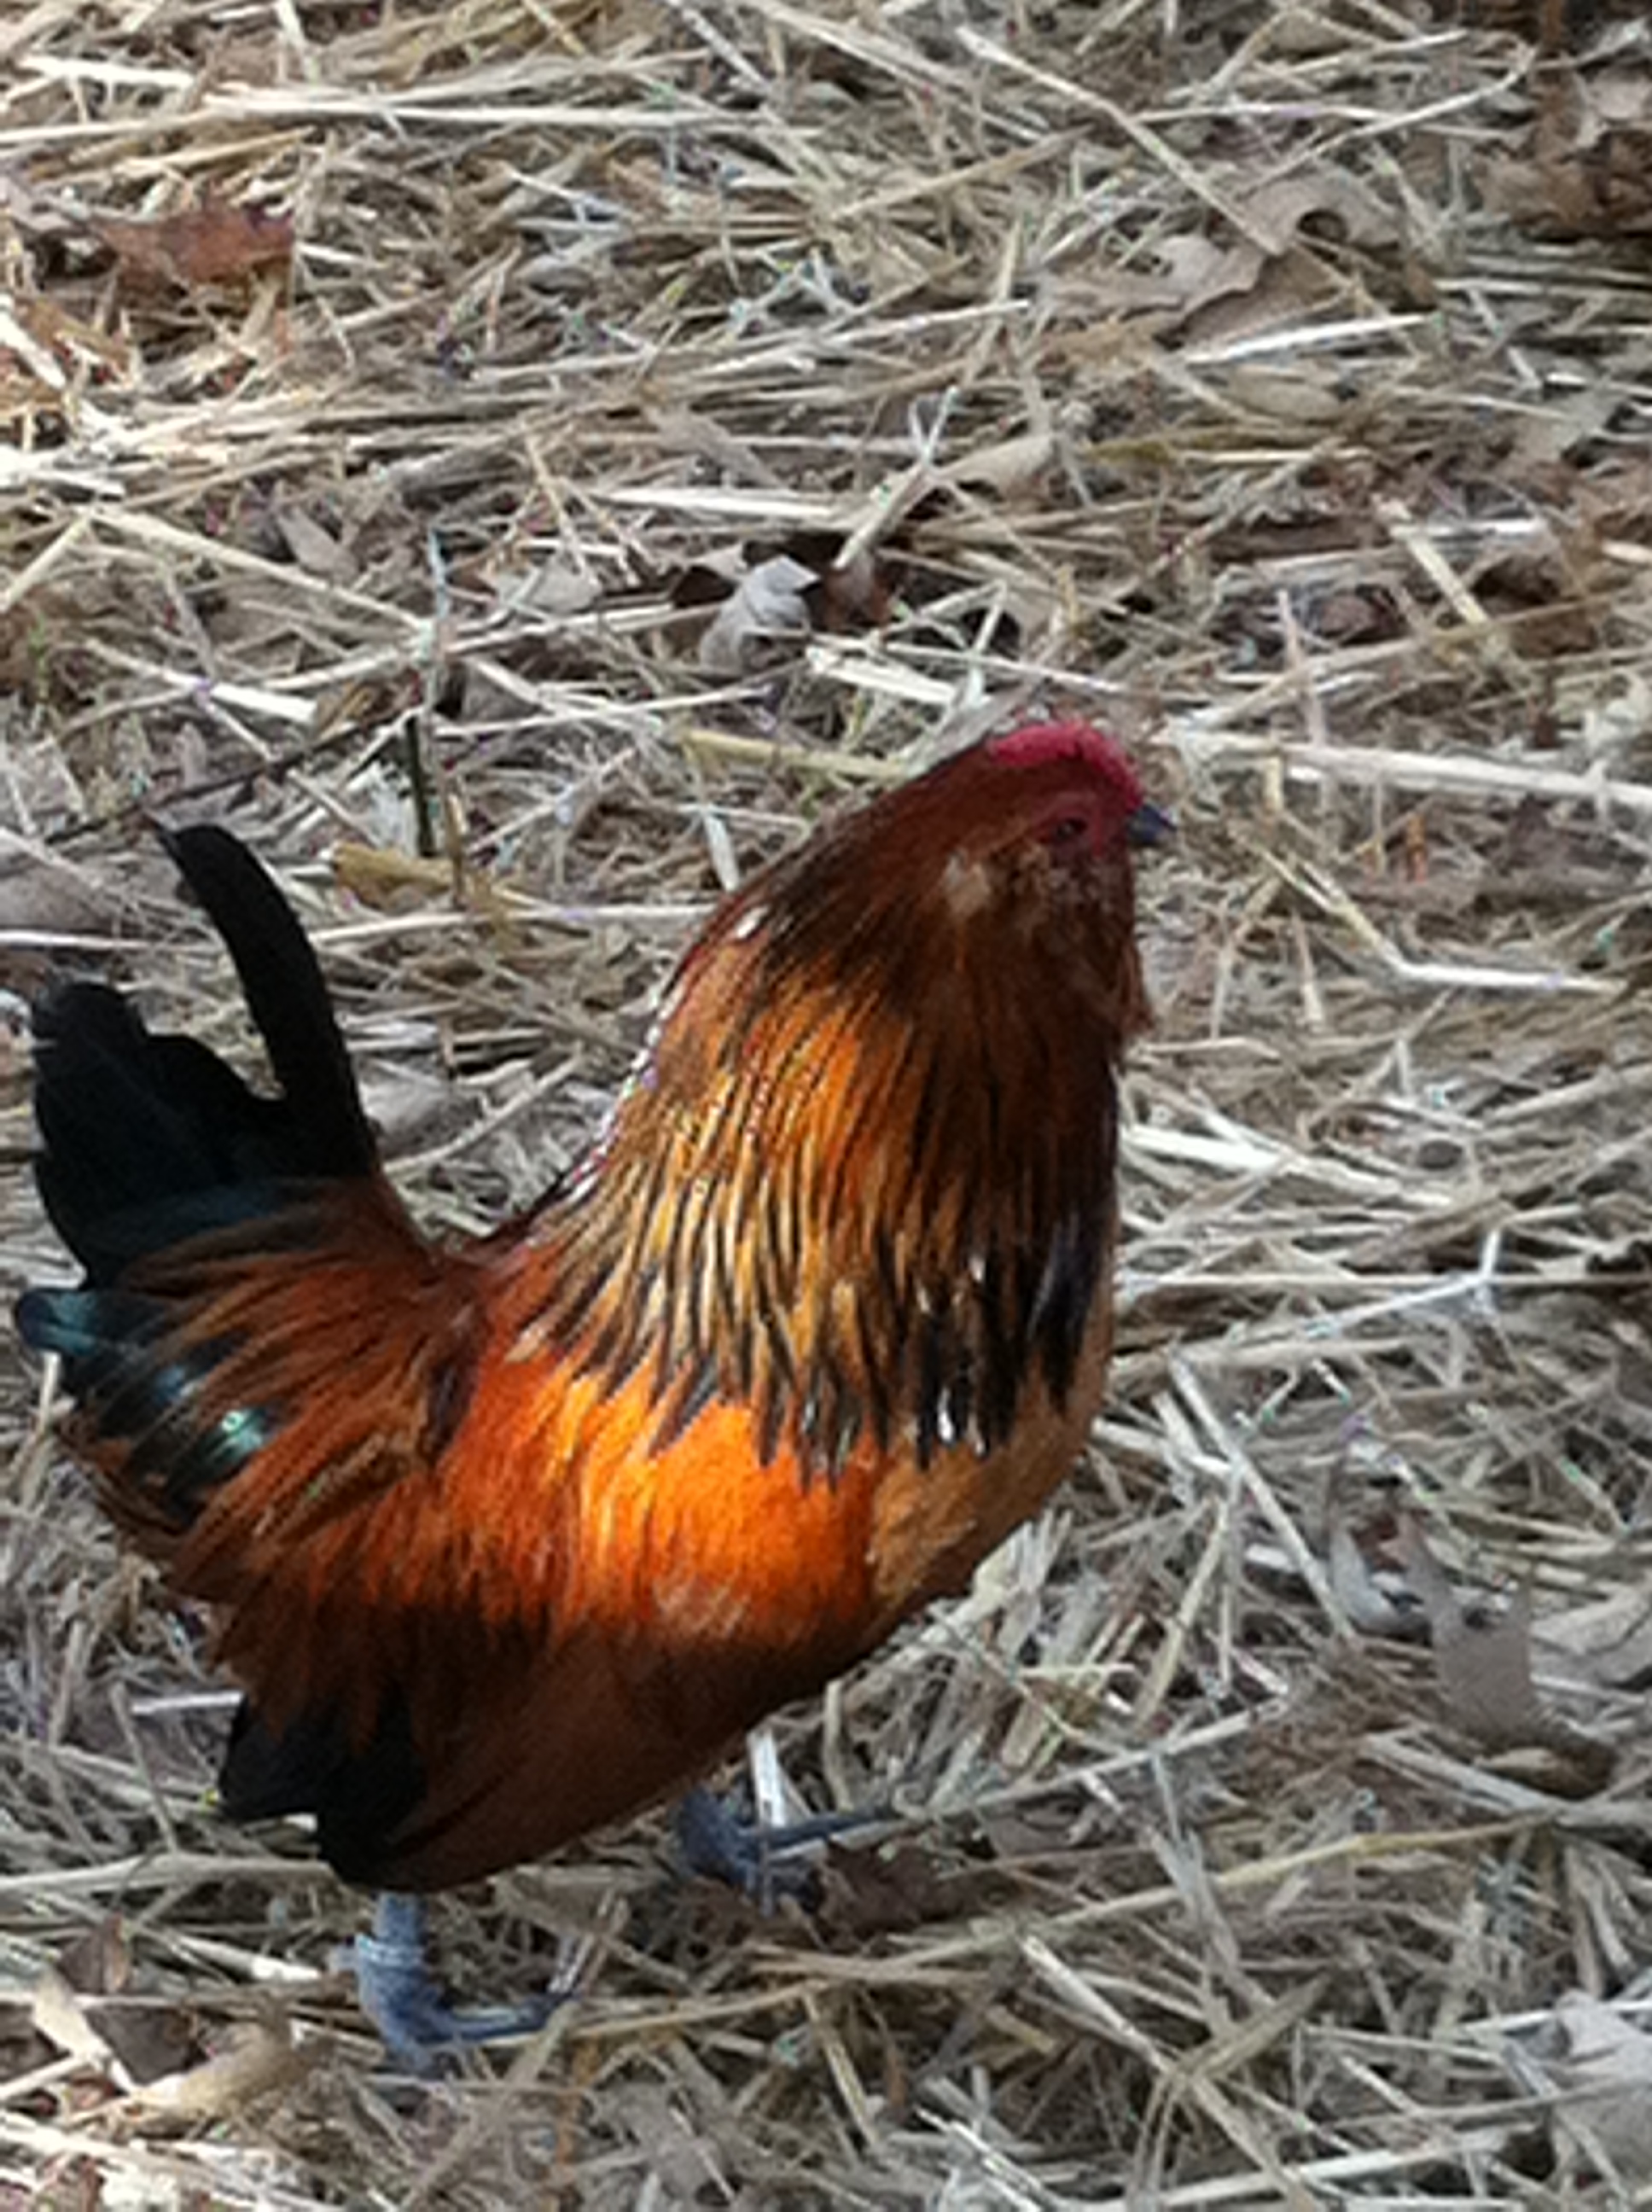 Colie, my rooster!